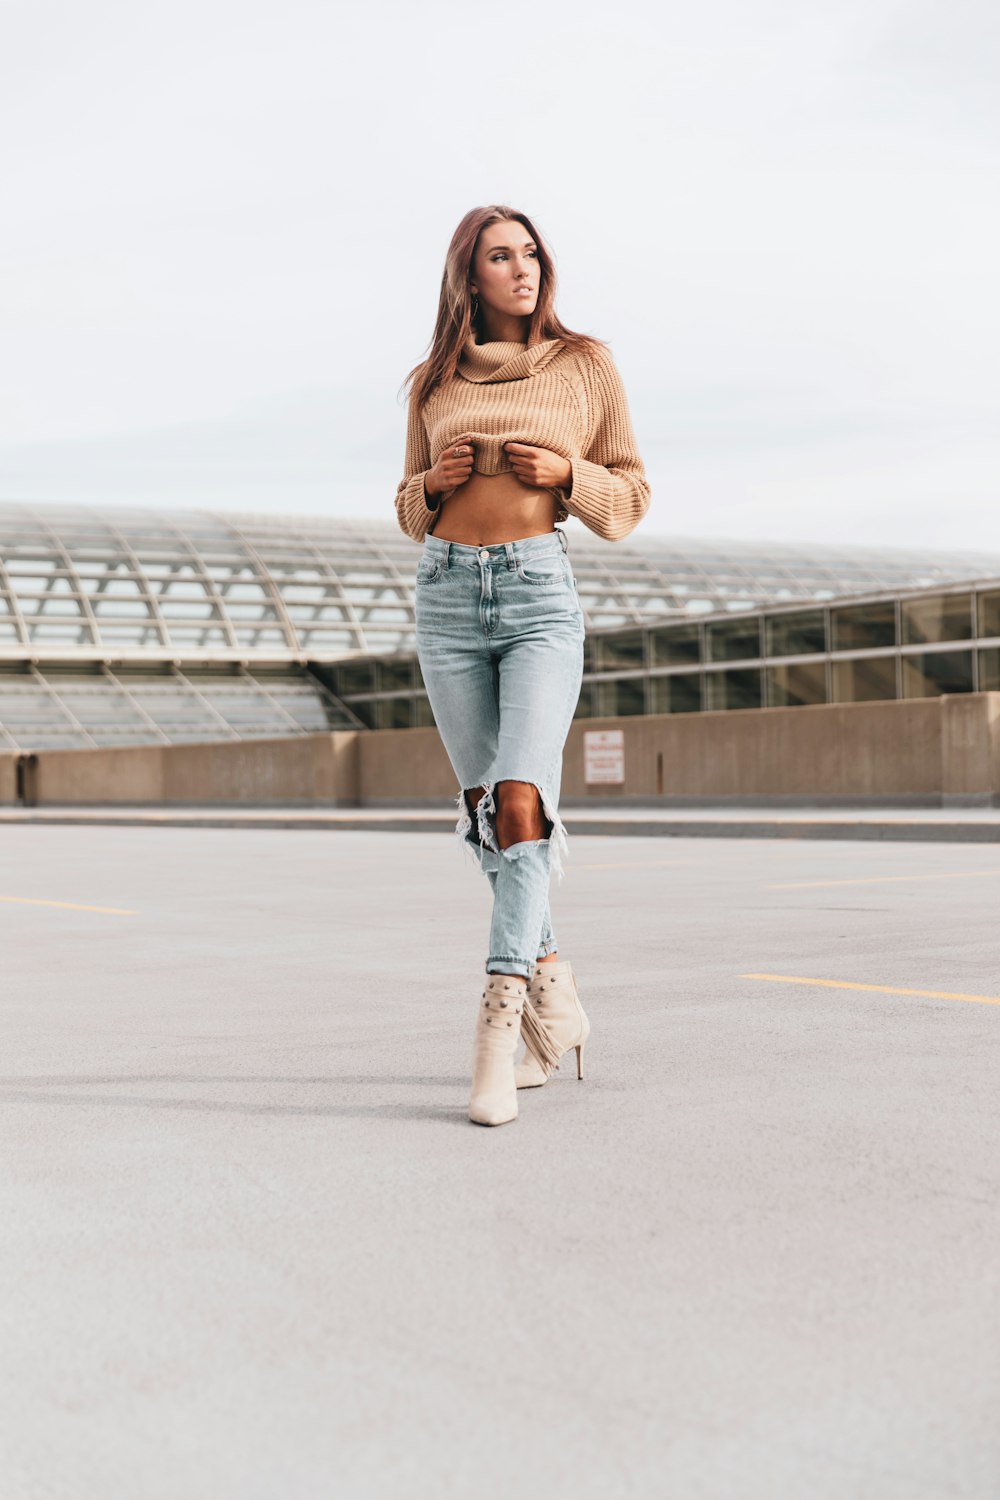 woman in brown sweater and blue denim jeans standing on gray concrete road during daytime